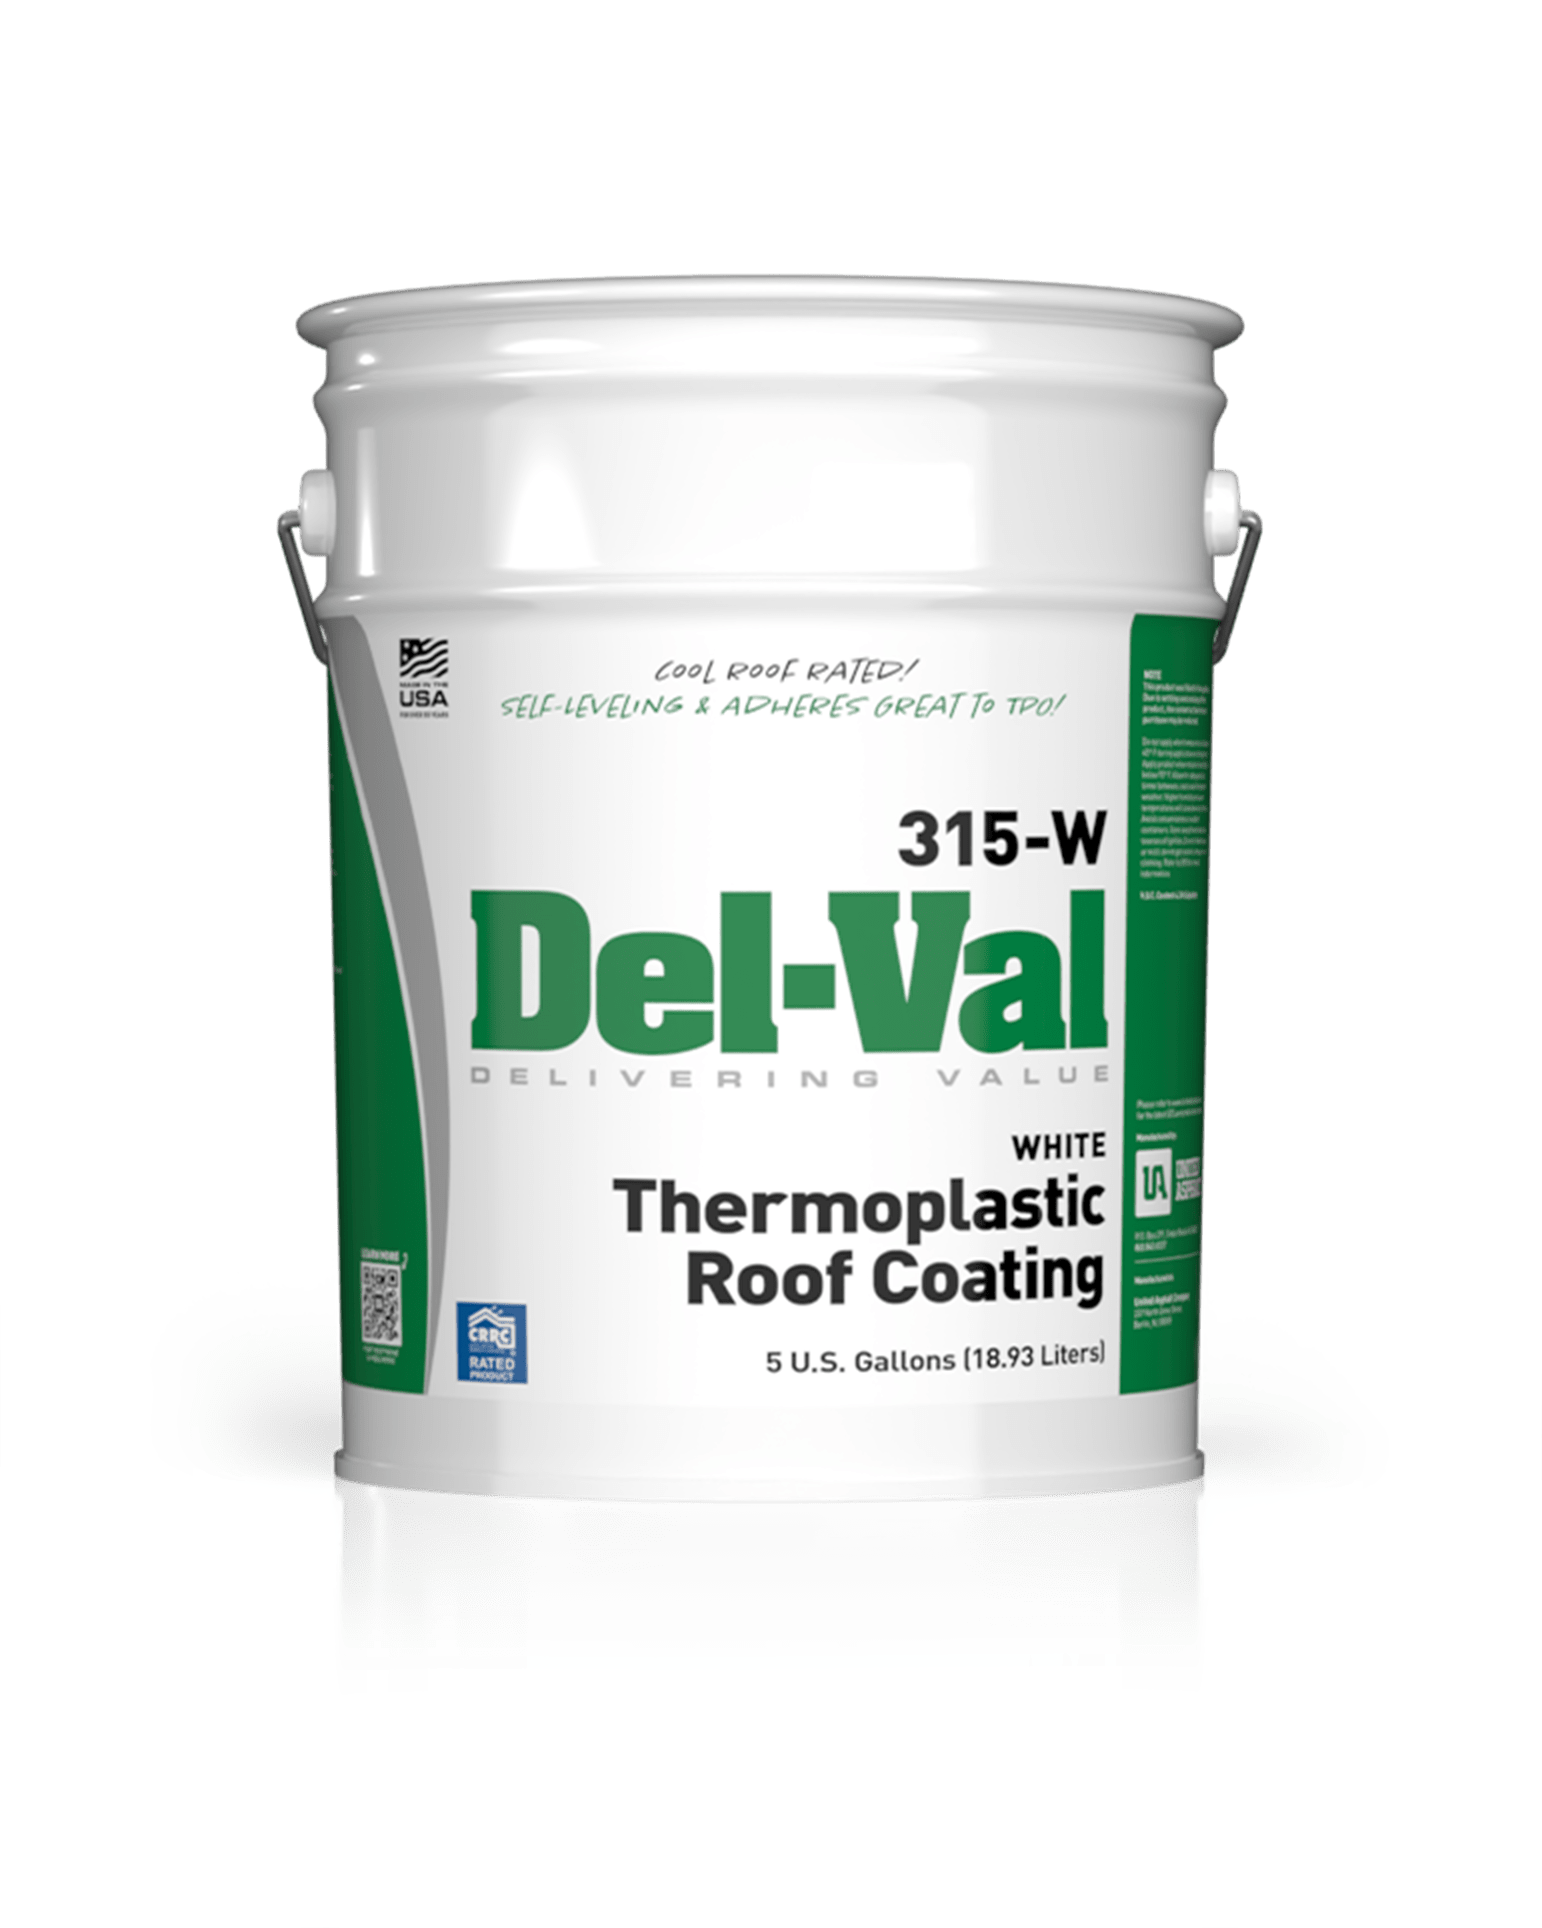 Del-Val 315-W Thermoplastic Roof Coating in White in 5 Gallon Pail